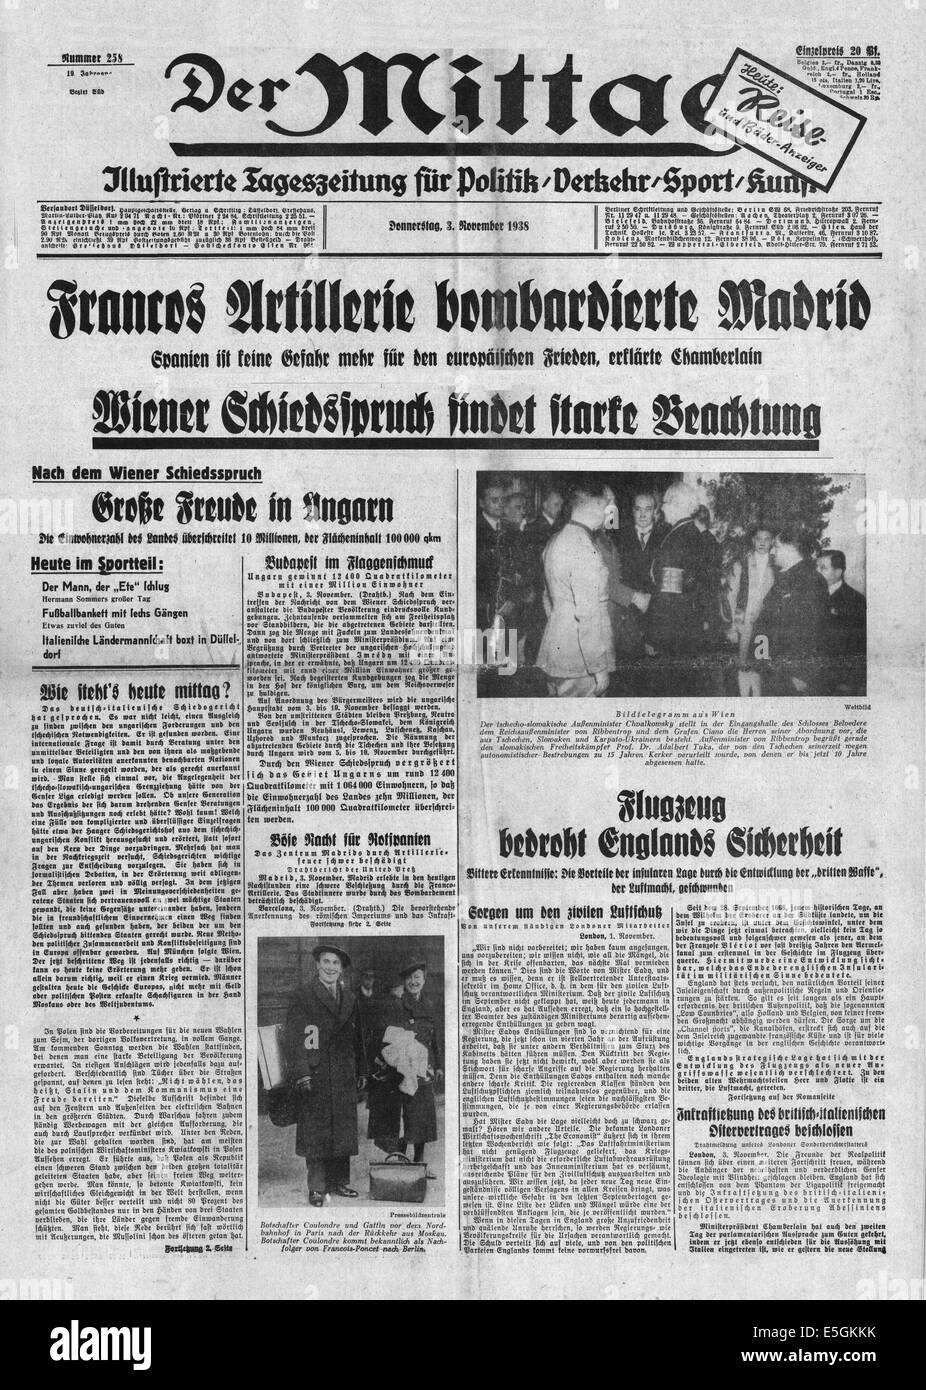 1938 Der Mittag (Germany) front page reporting General Franco's artillery bombards Madrid during the Spanish Civil War Stock Photo